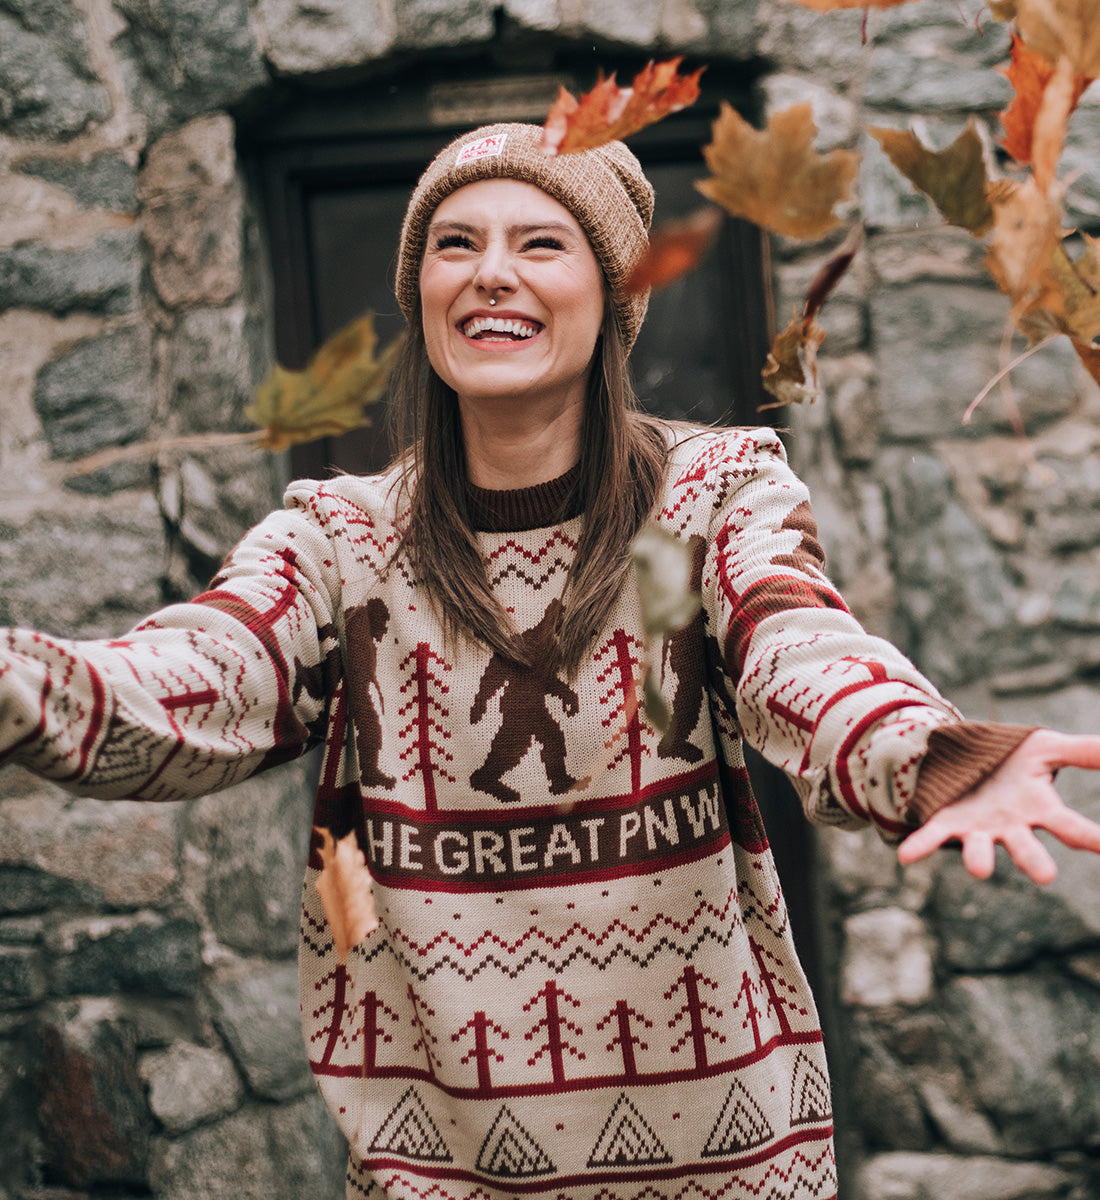 The Great PNW Festive Sweater